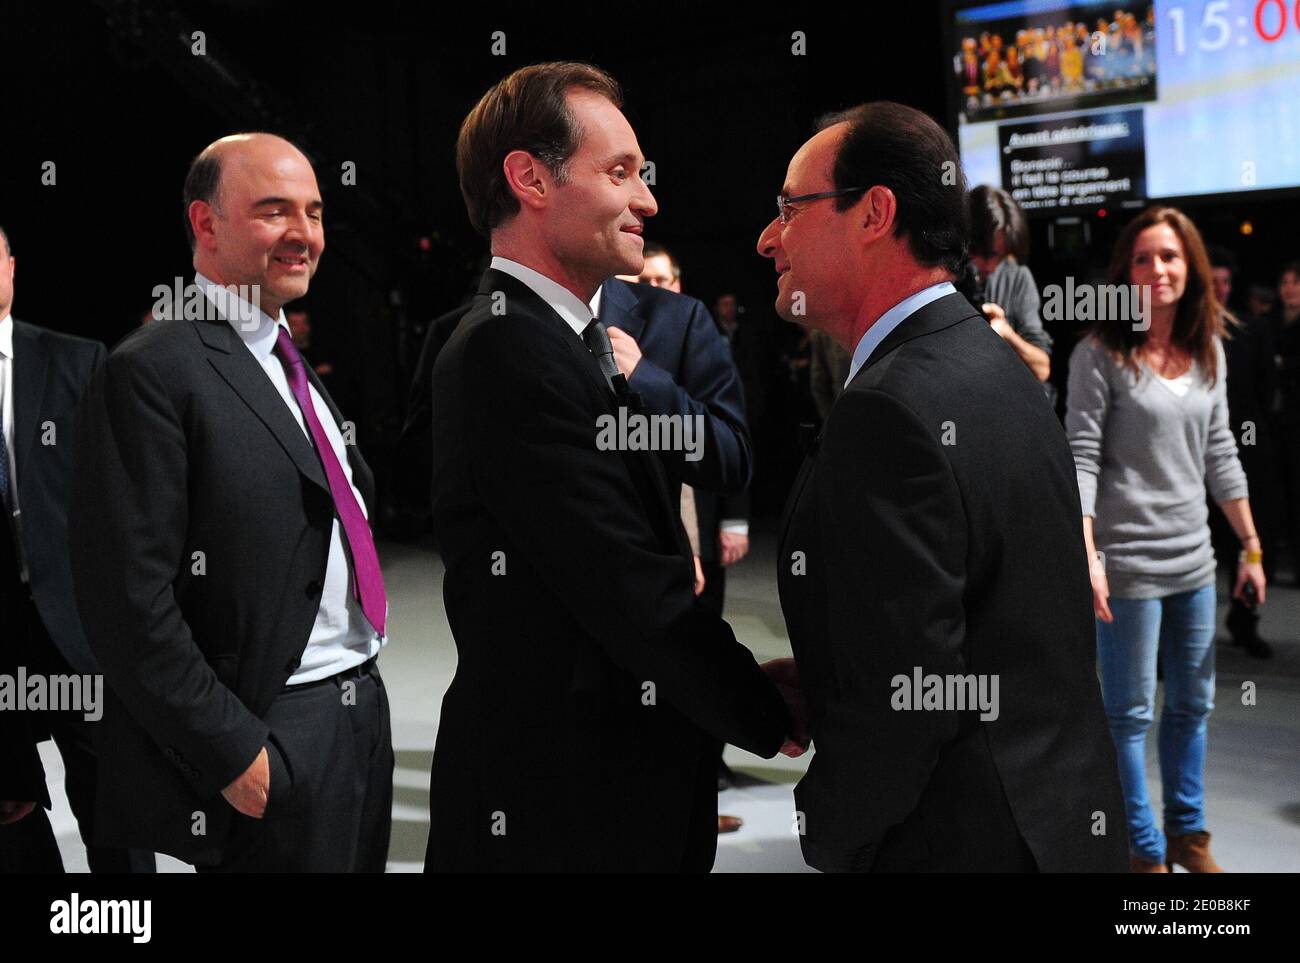 French opposition Socialist Party (PS) candidate for the 2012 presidential election Francois Hollande flanked by Pierre Moscovici speks with French journalist Fabien Namias before the TV broadcast show 'Des paroles et des actes' of French TV channel France 2 presented by French journalist David Pujadas in Saint-Denis La Plaine near Paris, France on March 15, 2012. Photo by Mousse/ABACAPRESS.COM Stock Photo